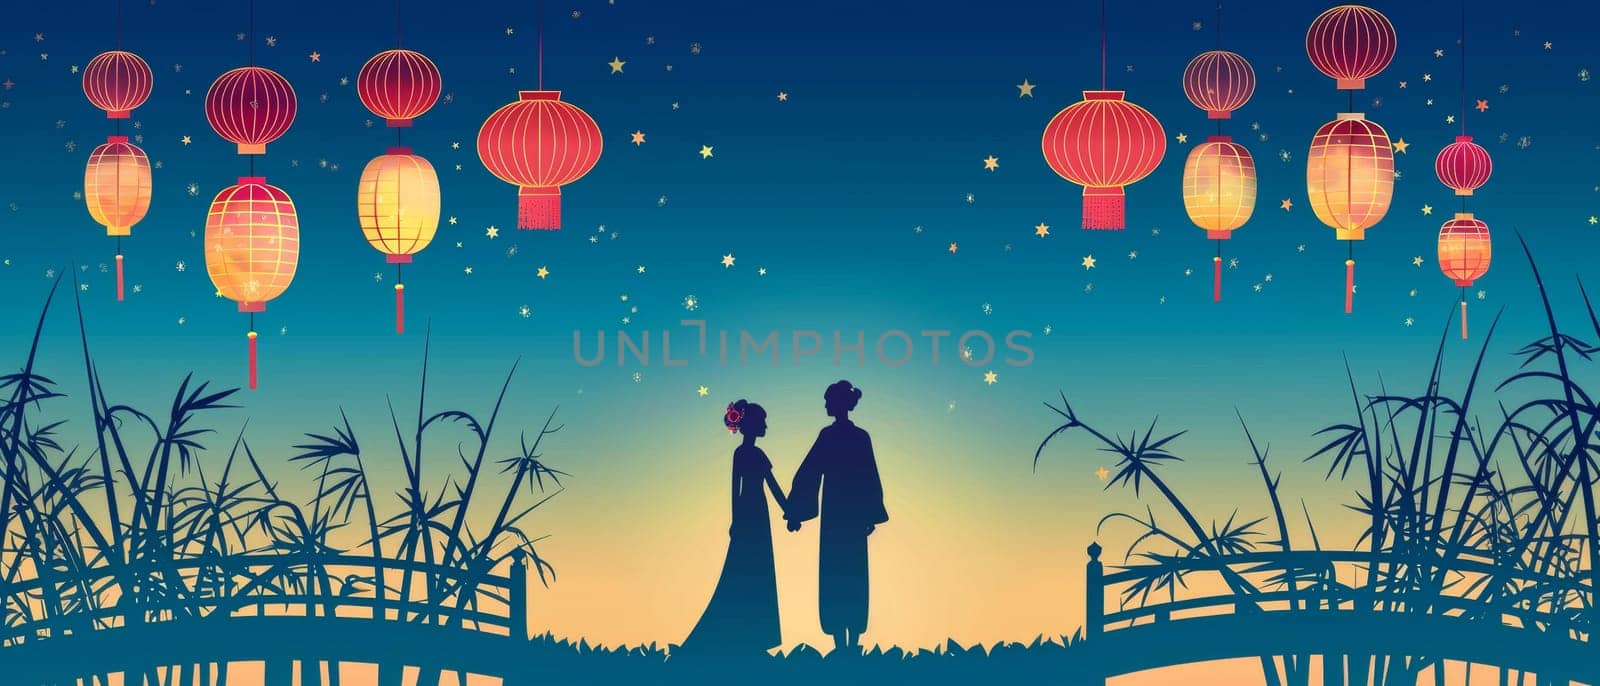 A couples silhouette stands under a starry sky adorned with vibrant paper lanterns, creating an enchanting and romantic atmosphere. by sfinks